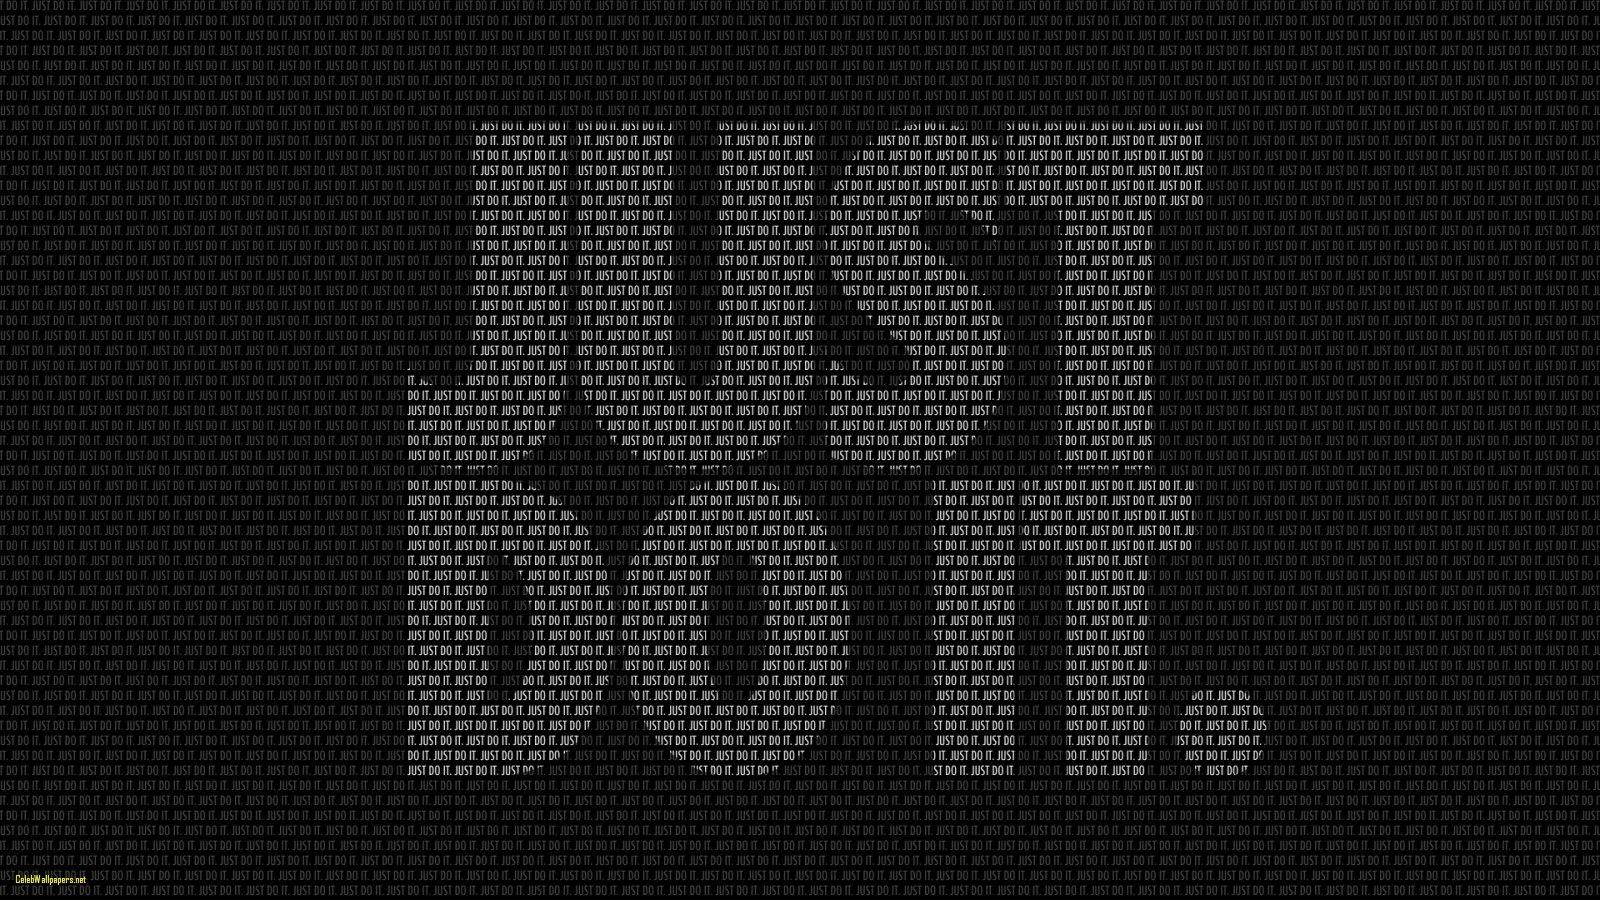 Just Do It Wallpapers In Hd Wallpaper Cave